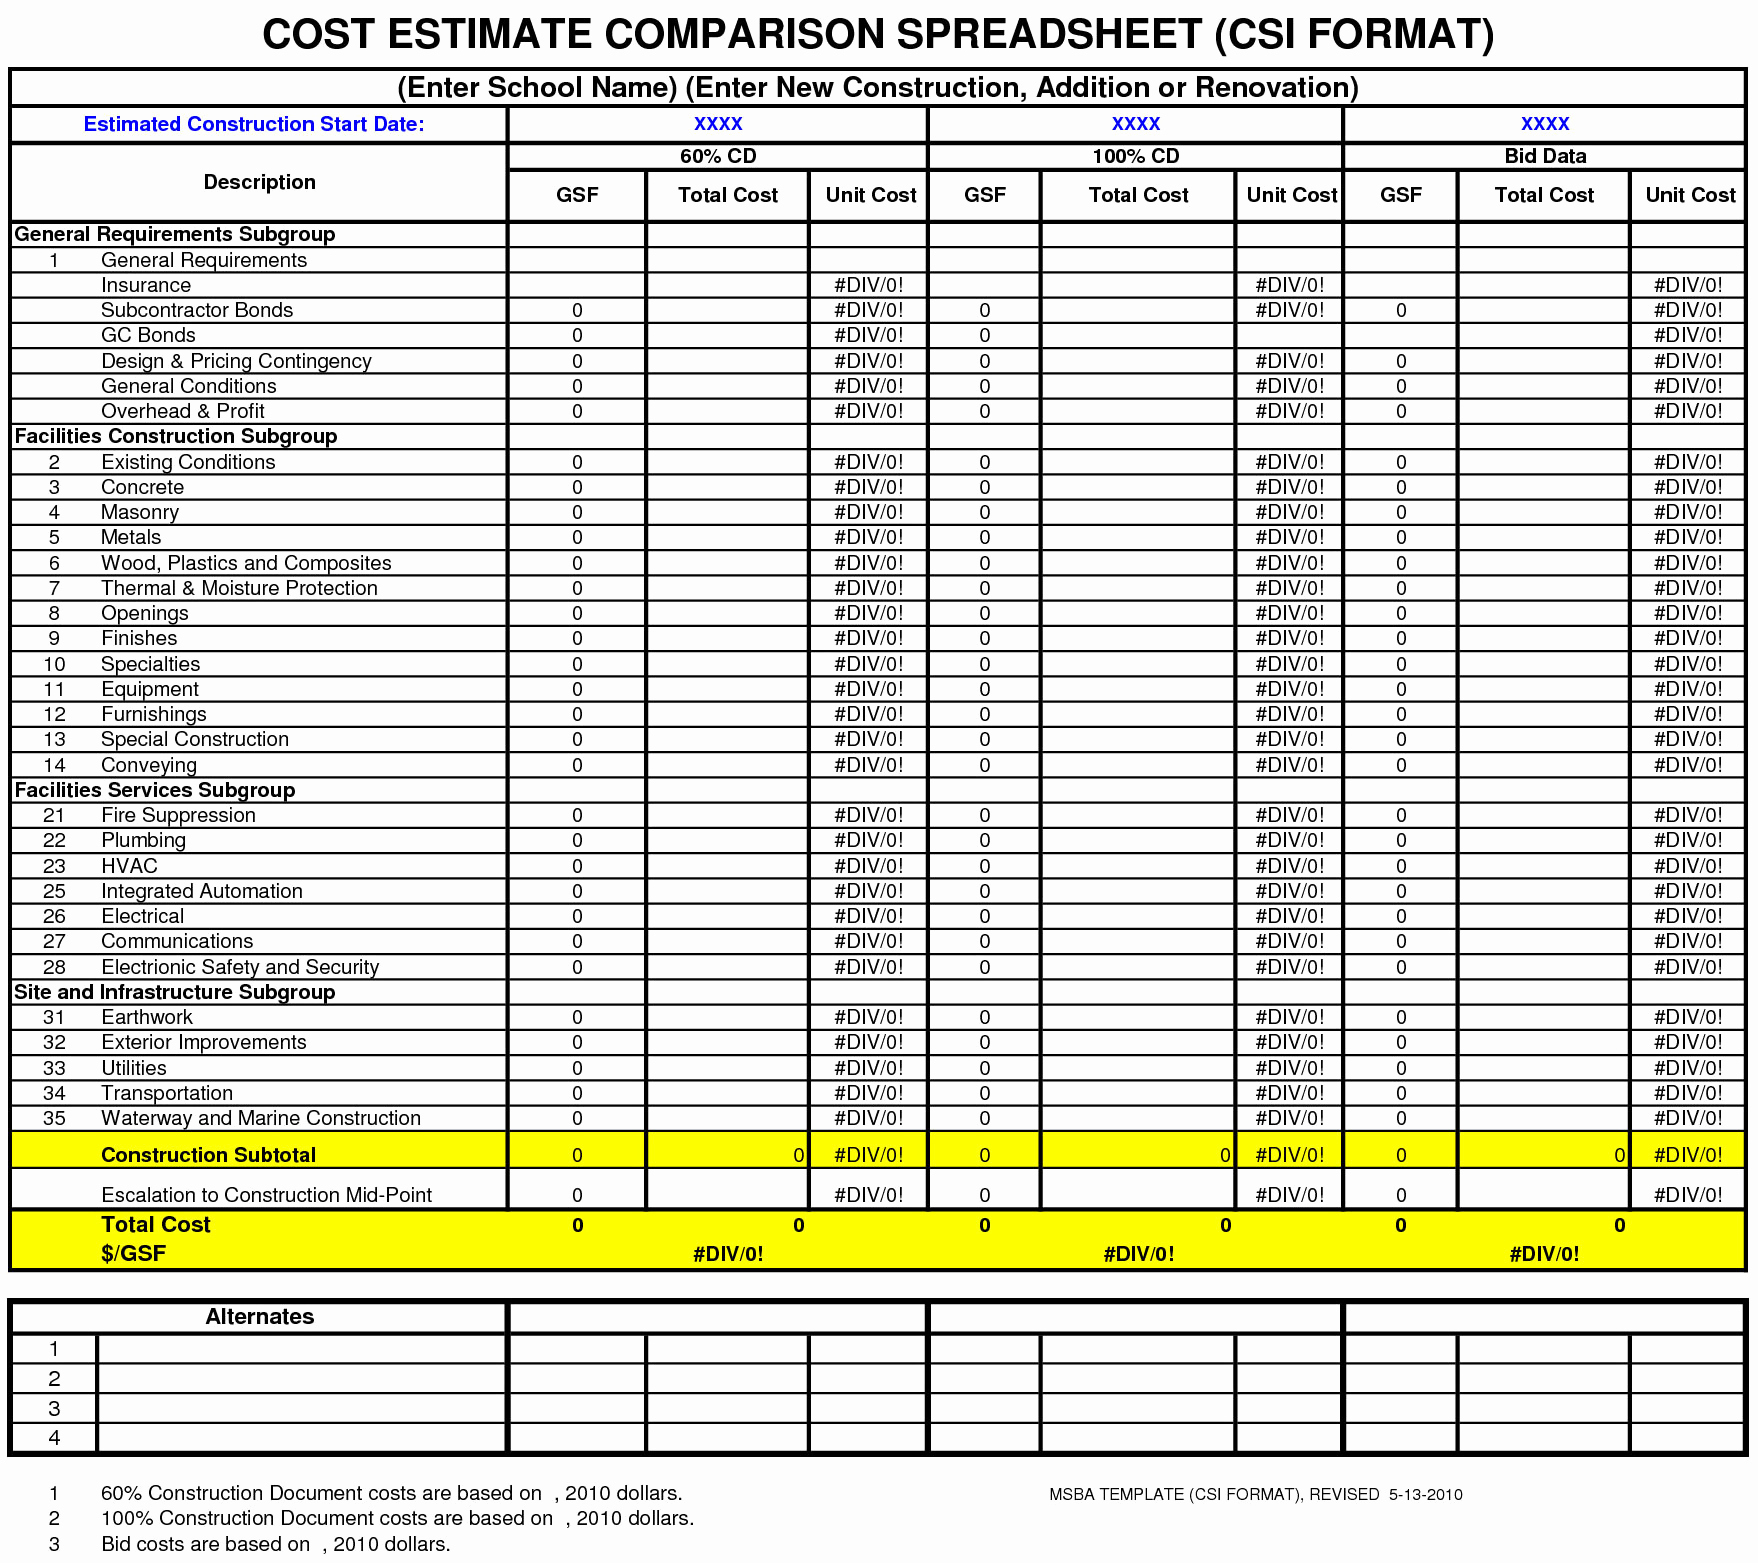 Construction Cost Estimate Vs Actual Spreadsheet Intended For Building Cost Estimator Spreadsheet Template Home Construction